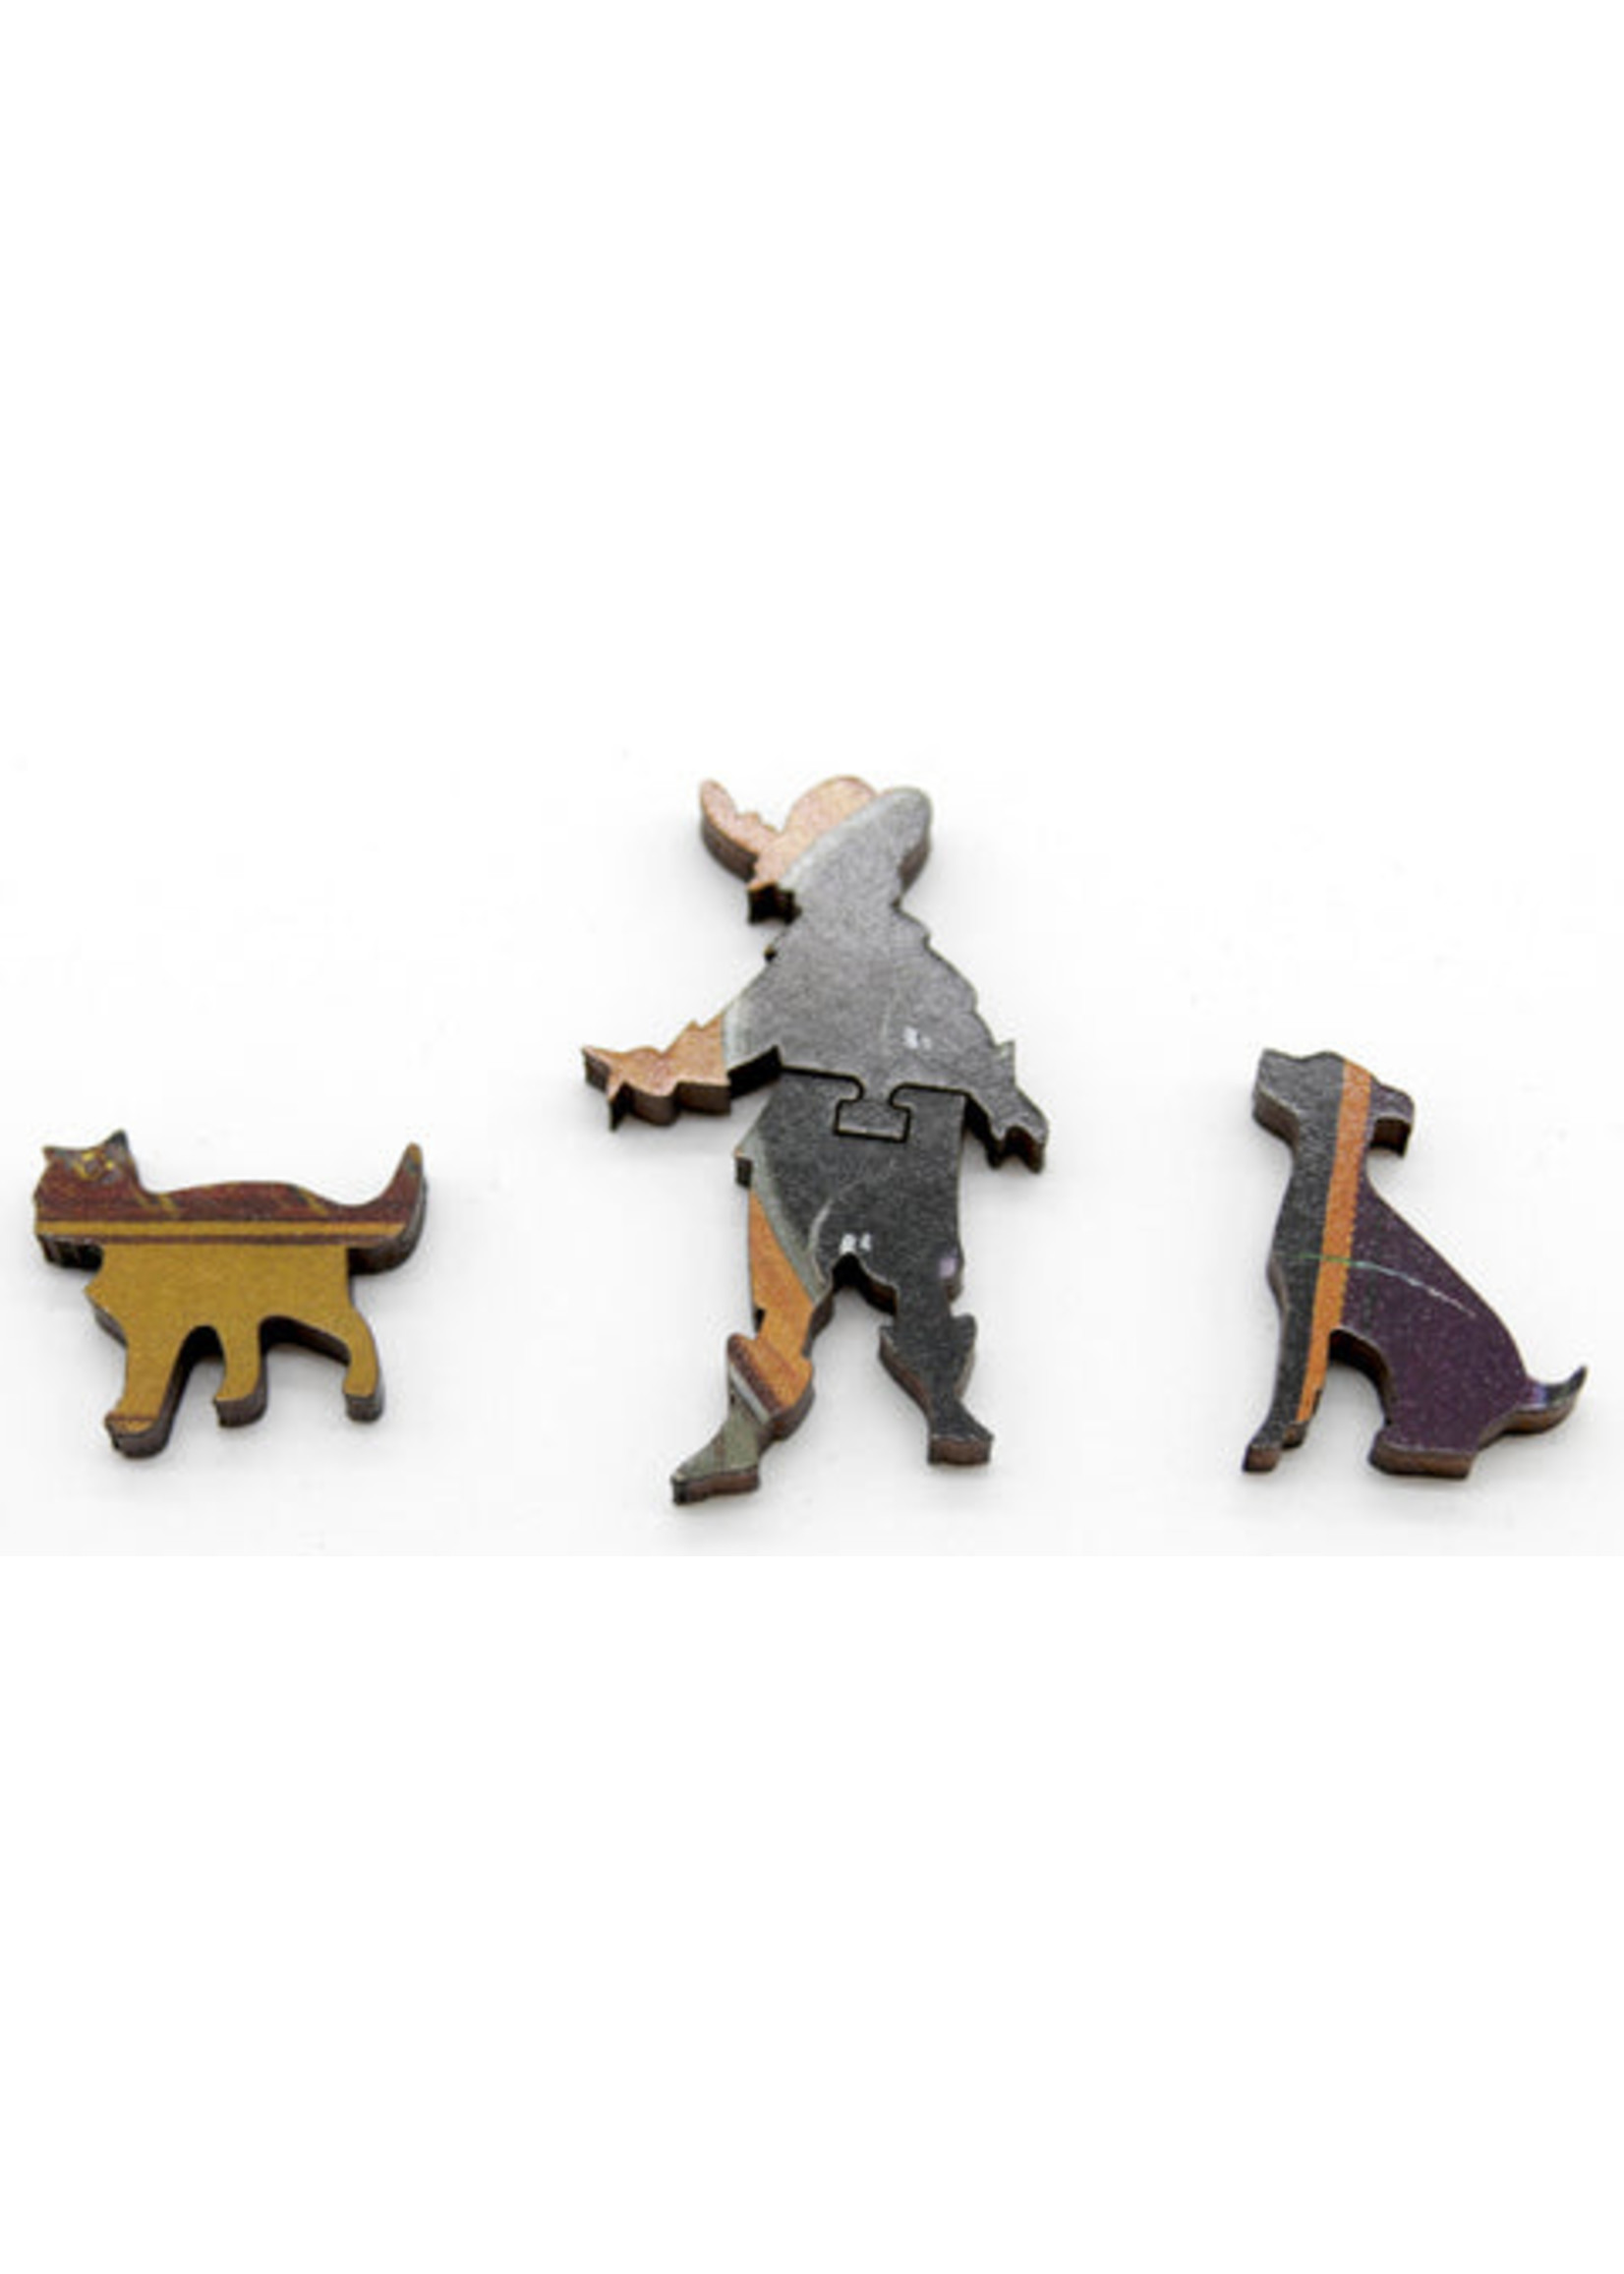 Artifact Puzzles "Swordfight" Wooden Jigsaw Puzzle